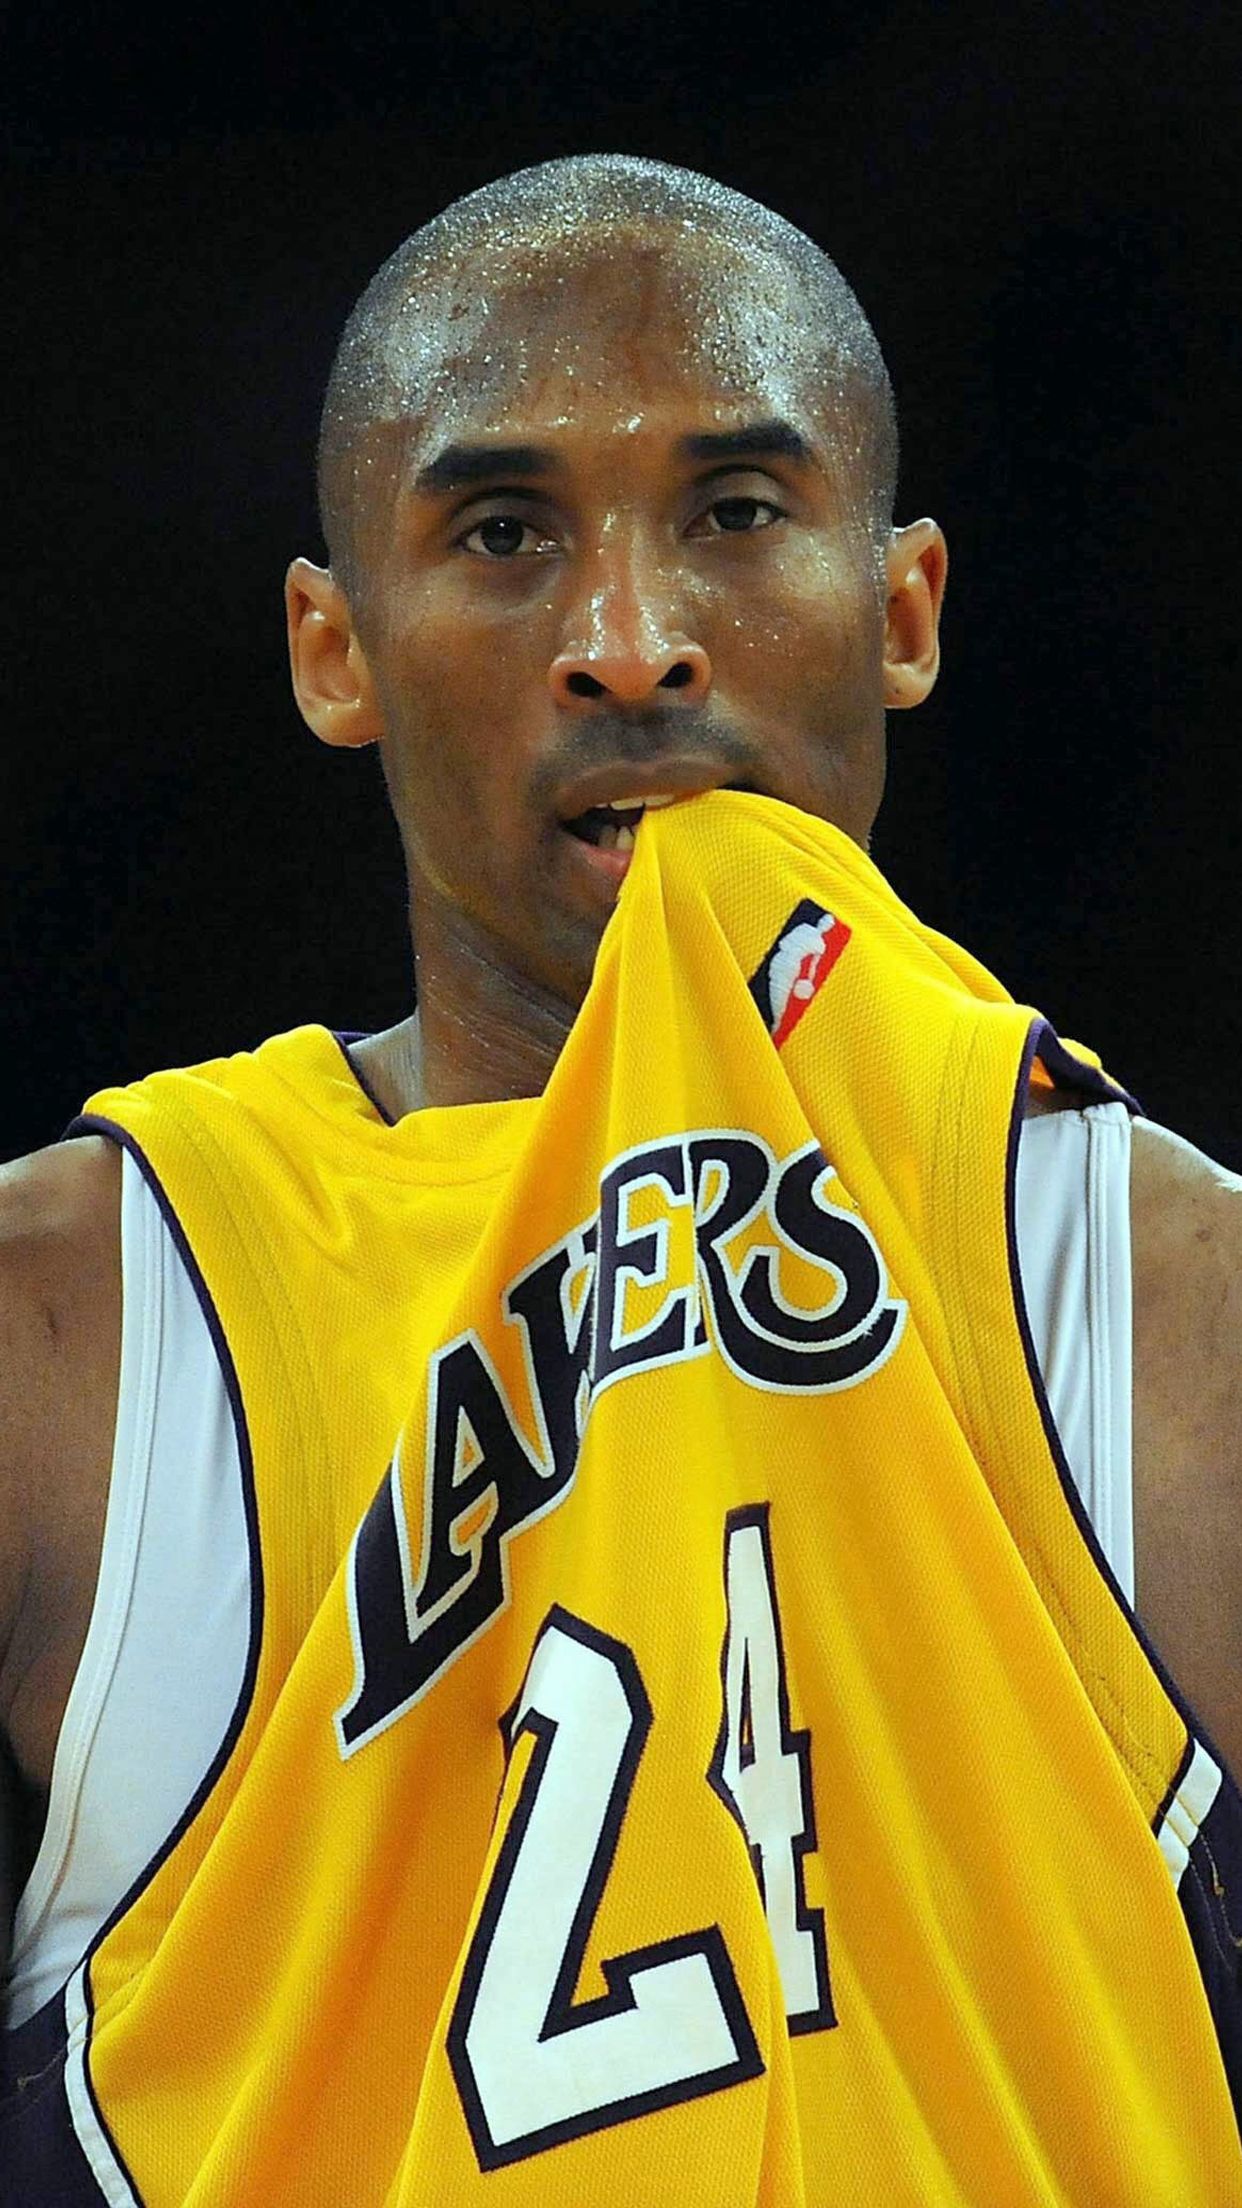 Kobe Bryant Wallpapers for iPhone 11, Pro Max, X, 8, 7, 6